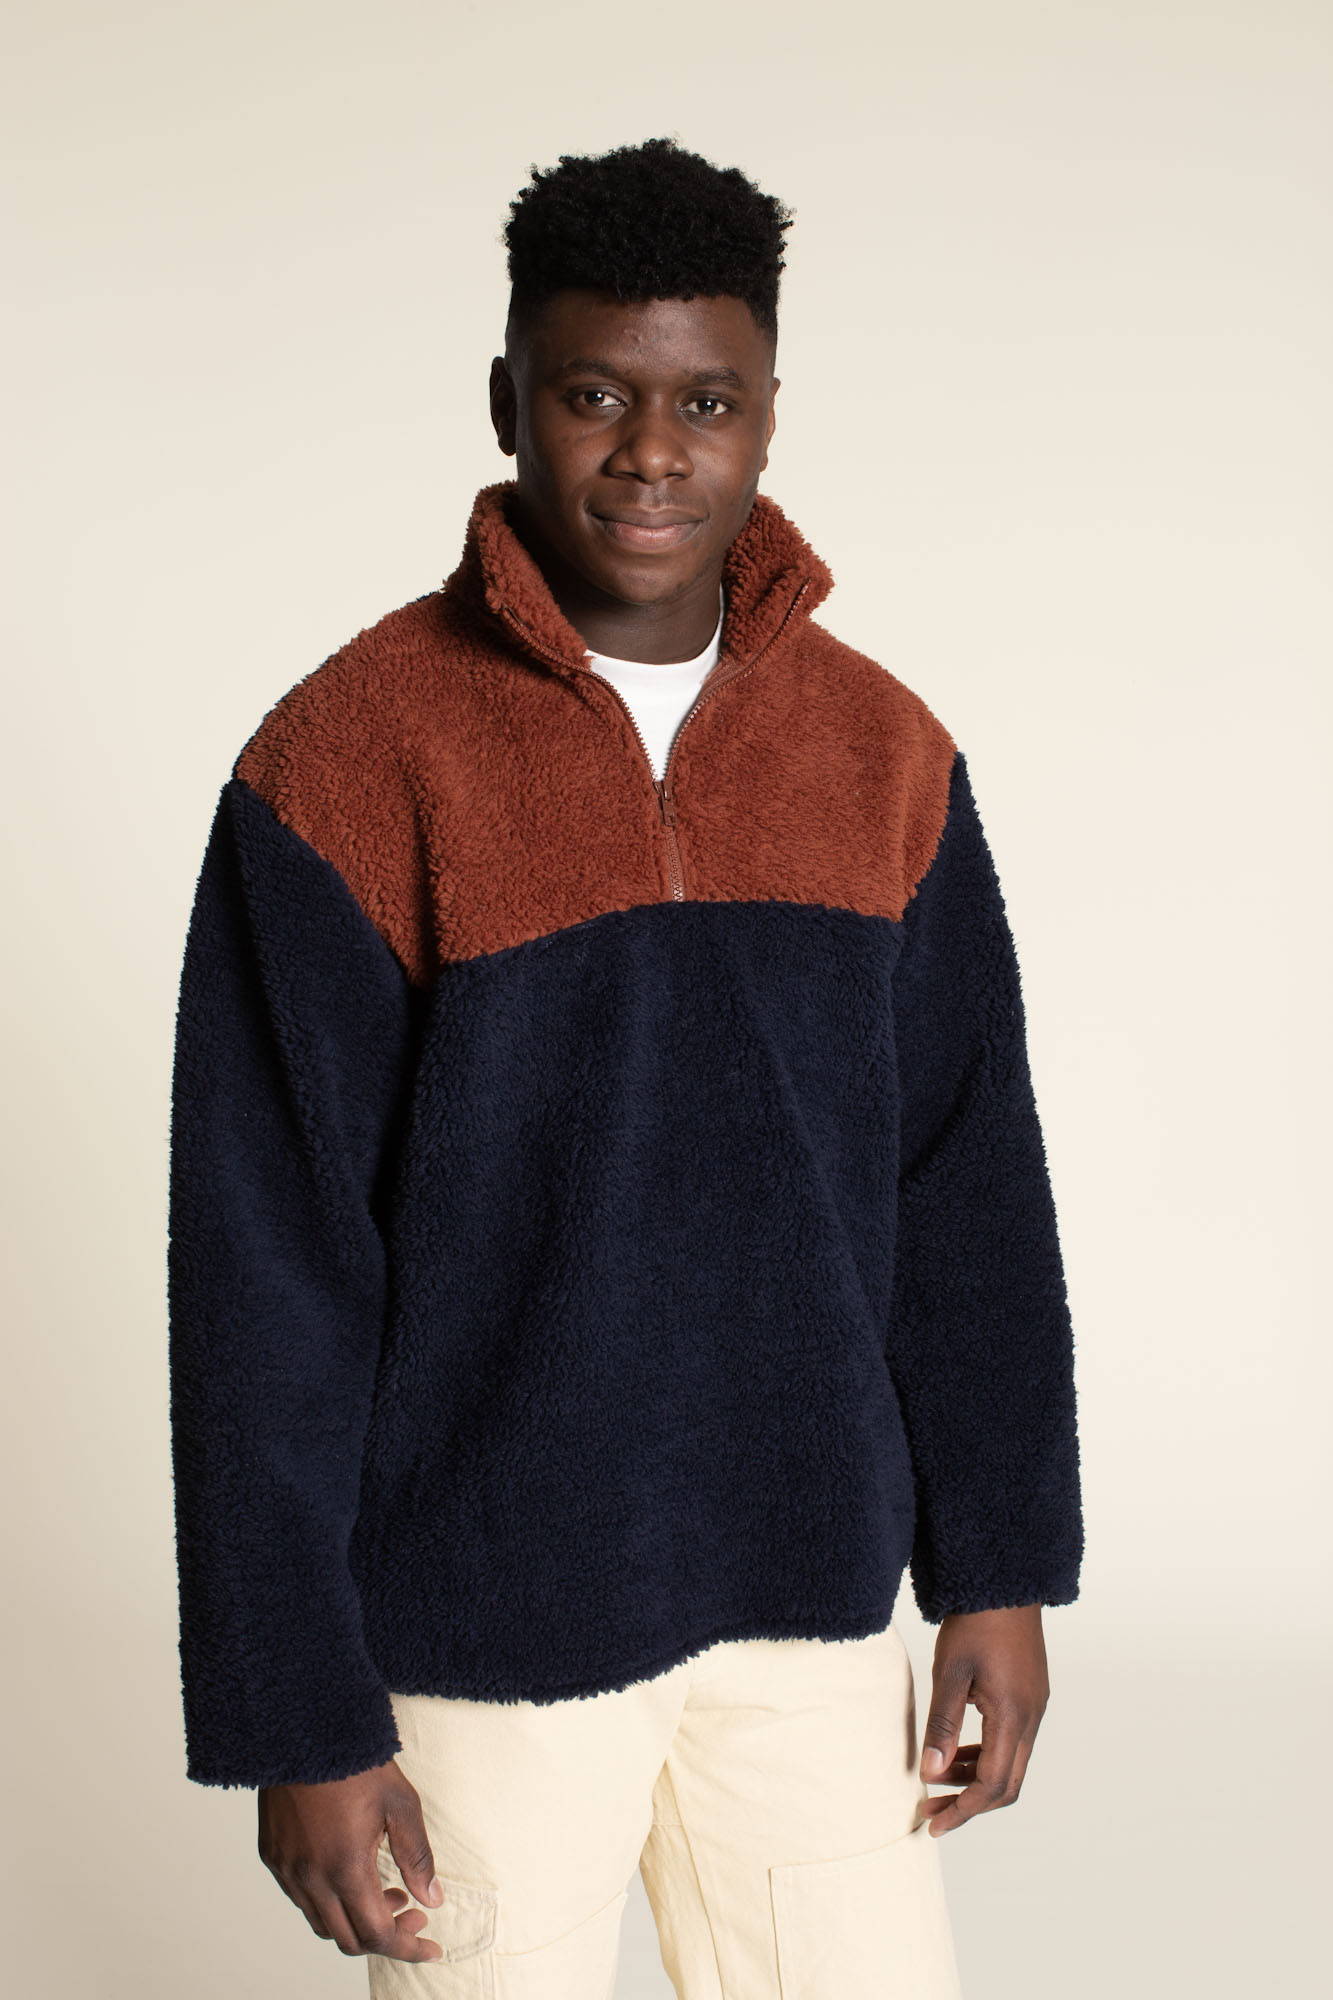 Wardrobe by Me Men's Zip-up Sweater - The Fold Line